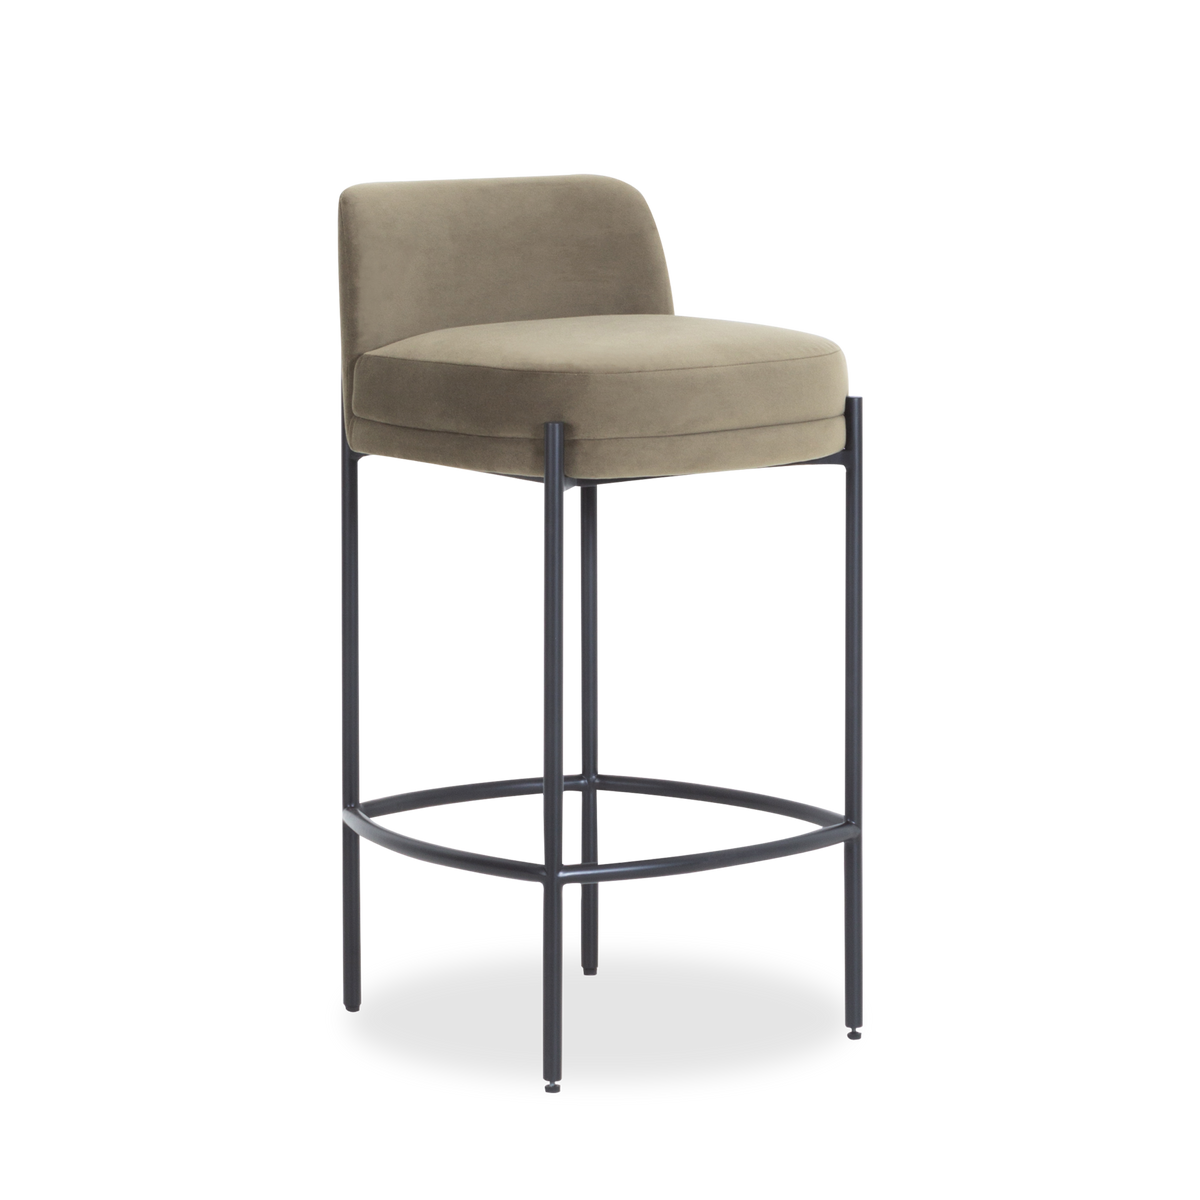 Chic and comfortable, the Novak Counter Stool offers an effortlessly stylish look.